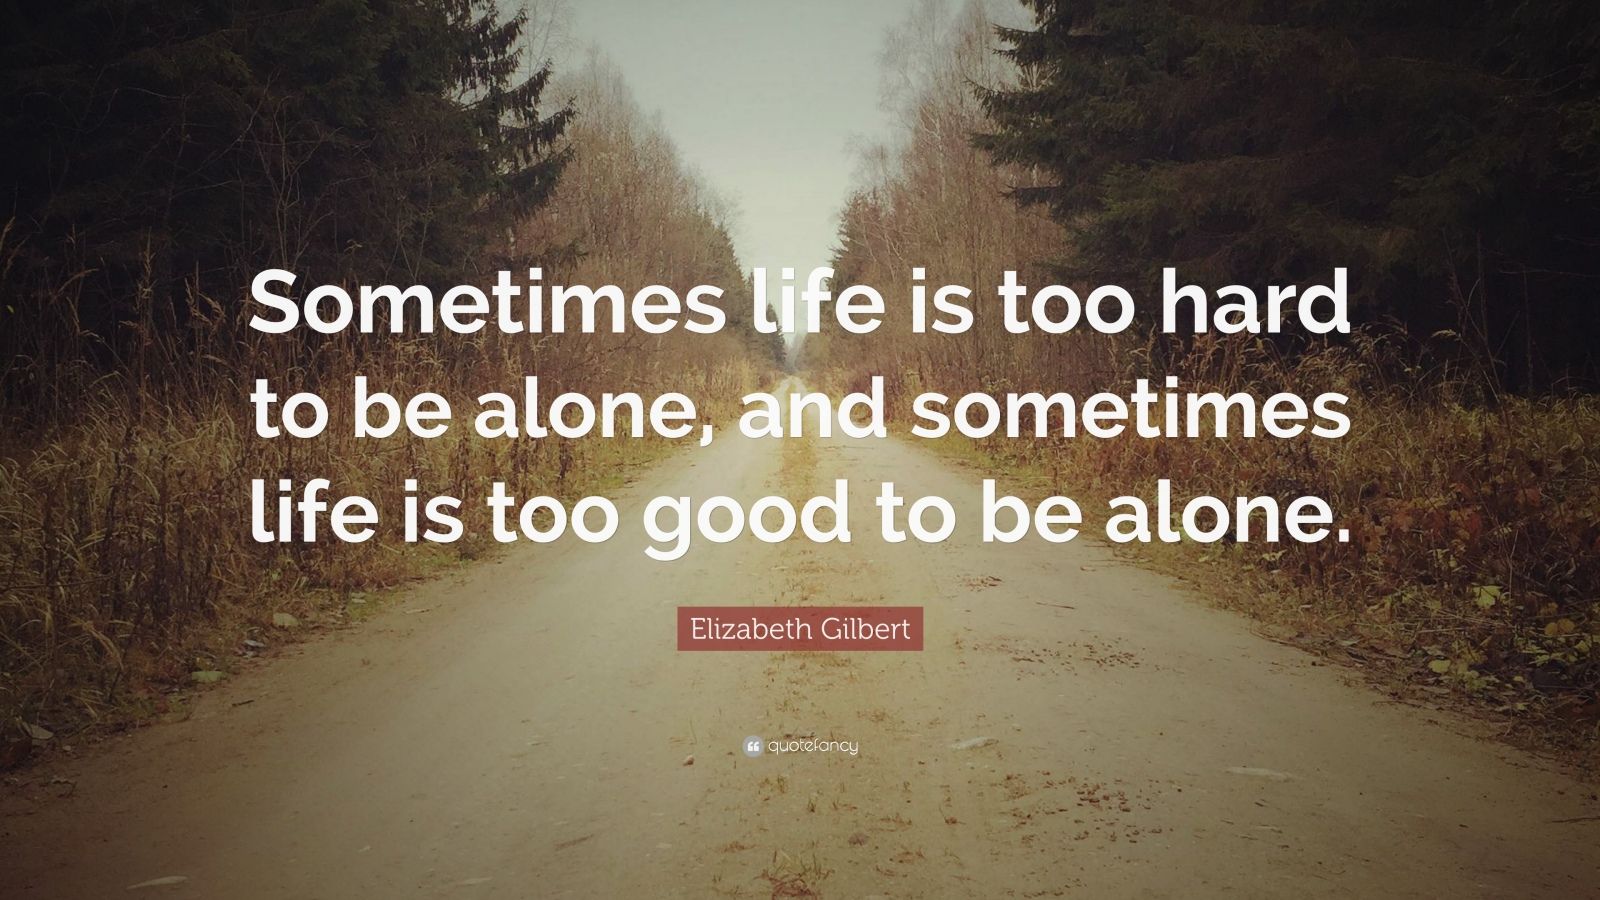 Elizabeth Gilbert Quote: “Sometimes life is too hard to be alone, and ...